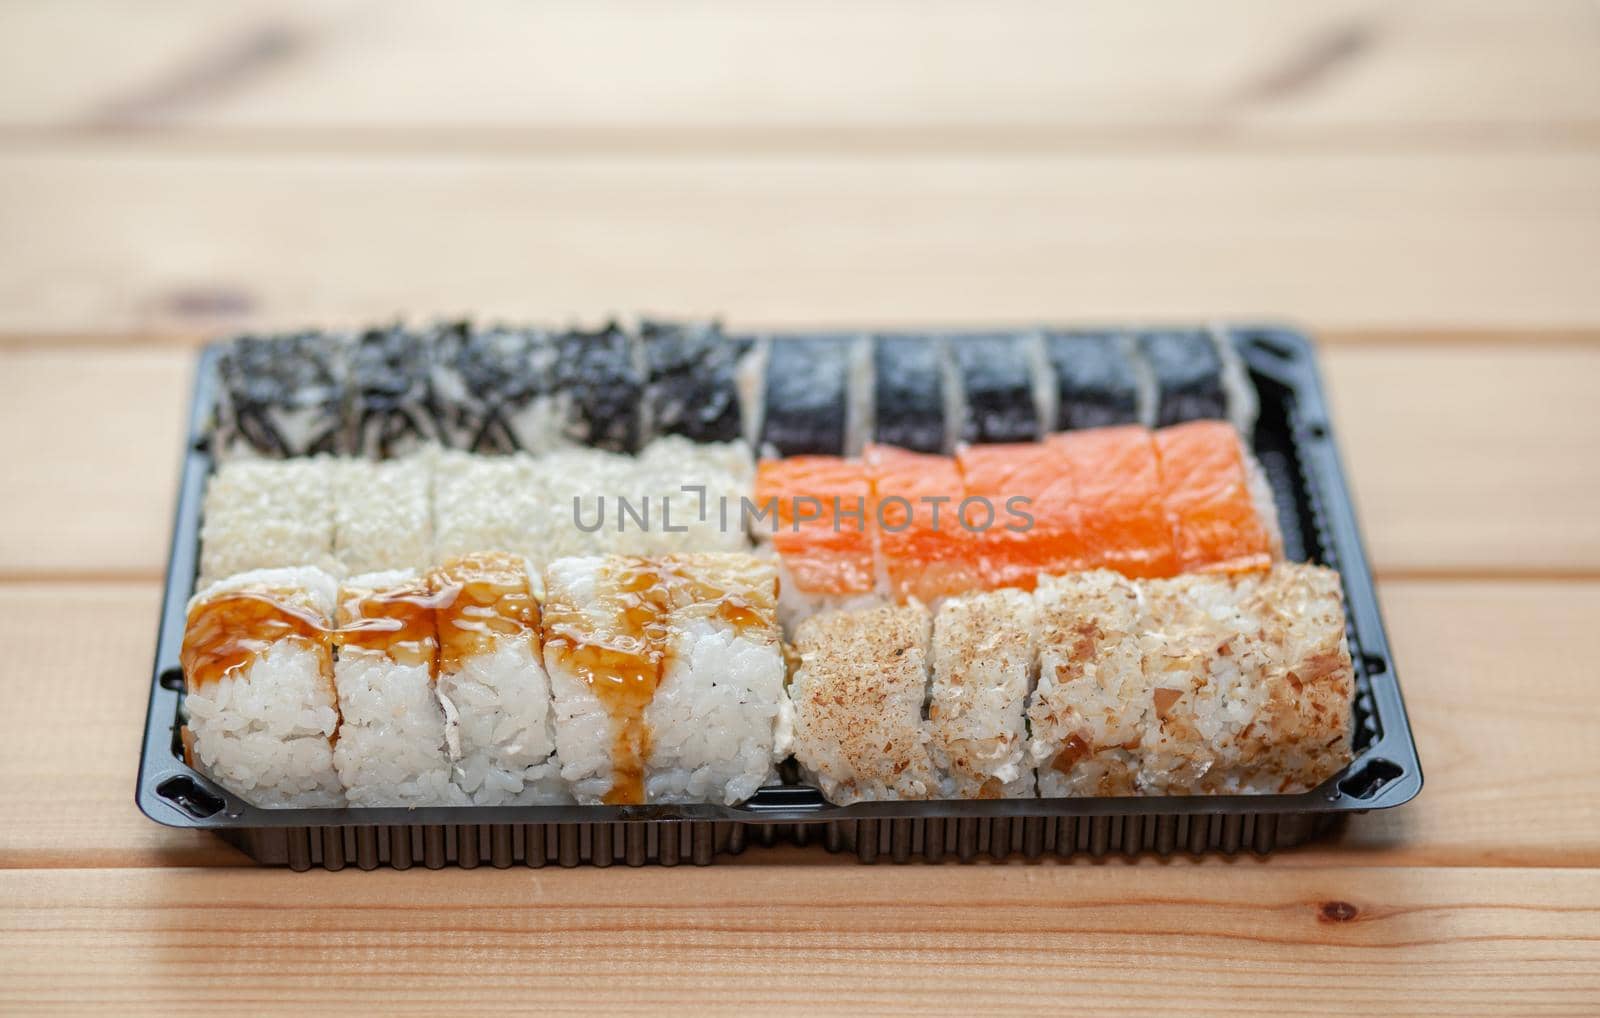 Making sushi and rolls at home. Sushi with seafood, salad and white rice. Food for family and friends. A set of different rolls and sushi on a tray.